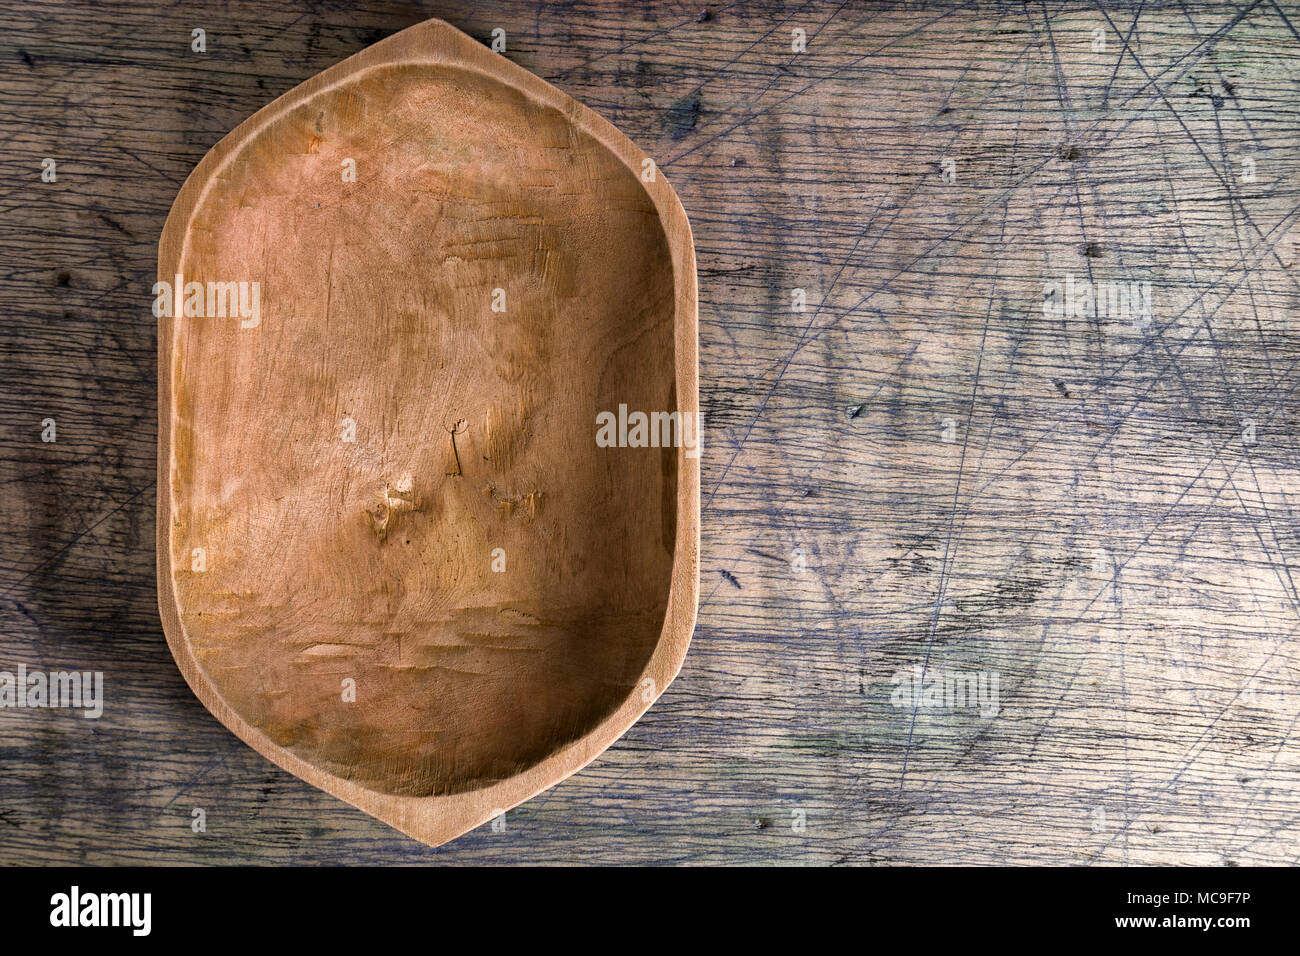 rustic wood bowl on wood surface Stock Photo